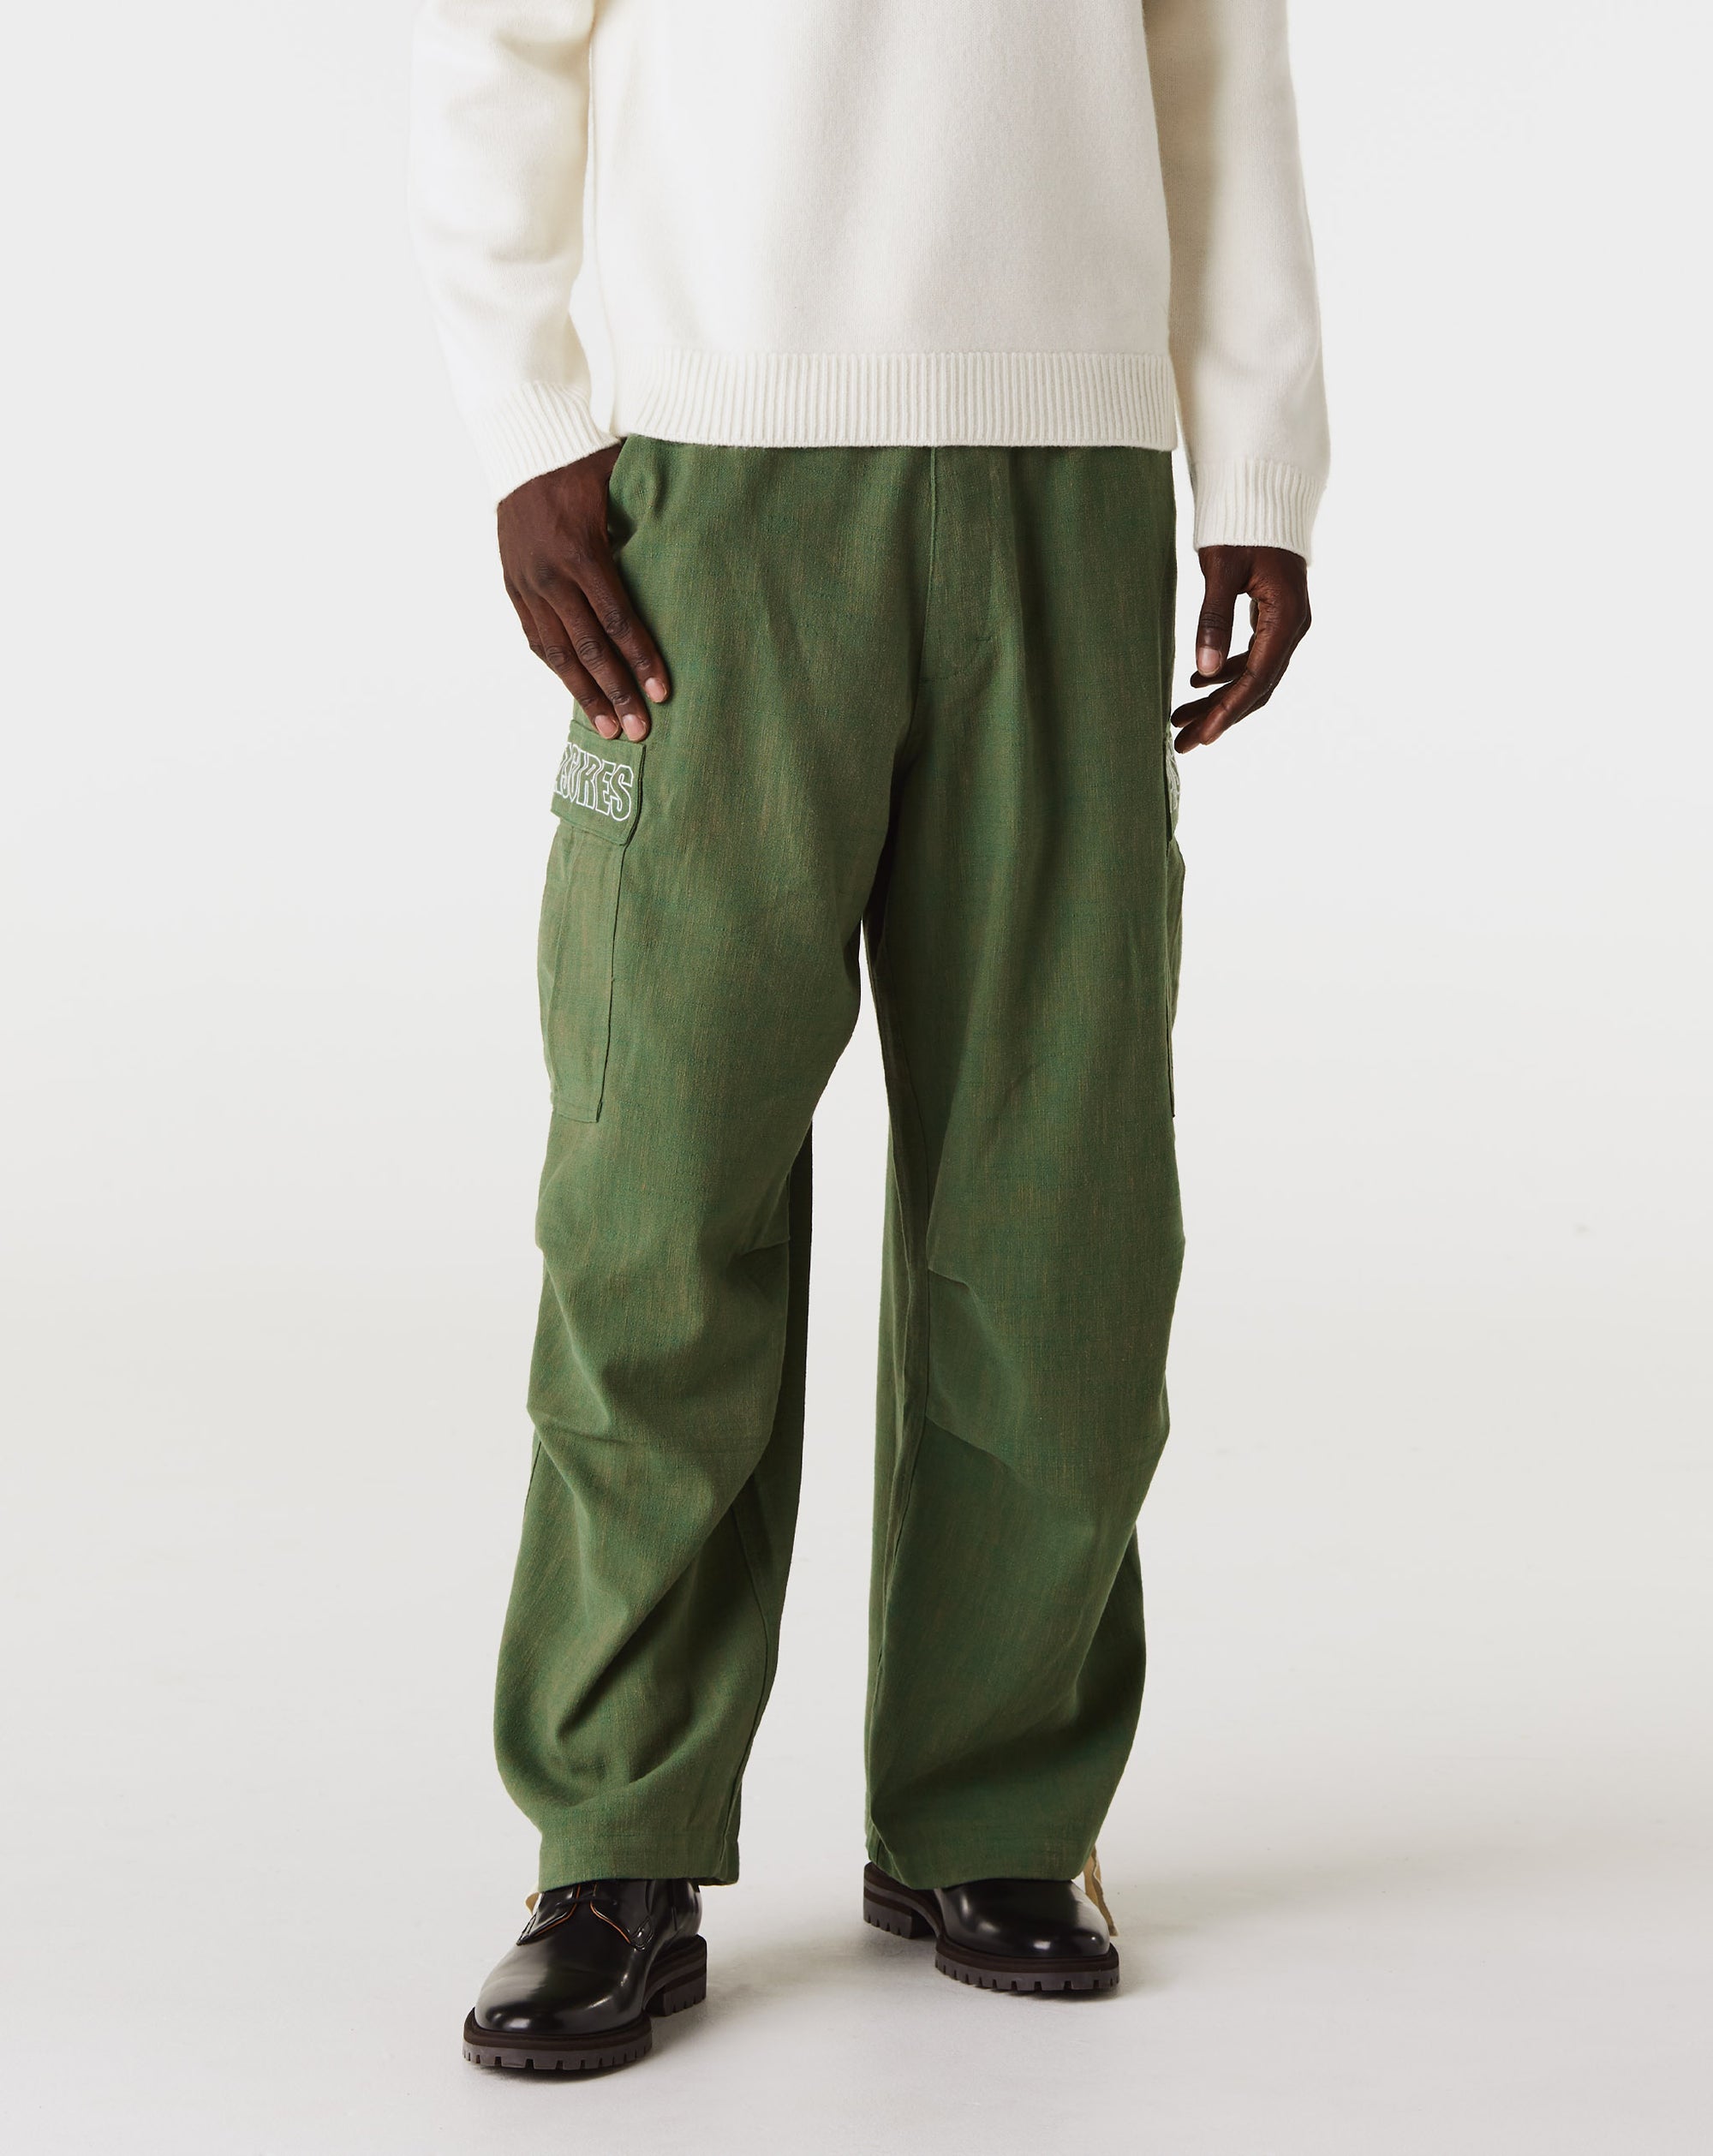 Pleasures Visitor Wide Fit Cargo Pants - Rule of Next Apparel